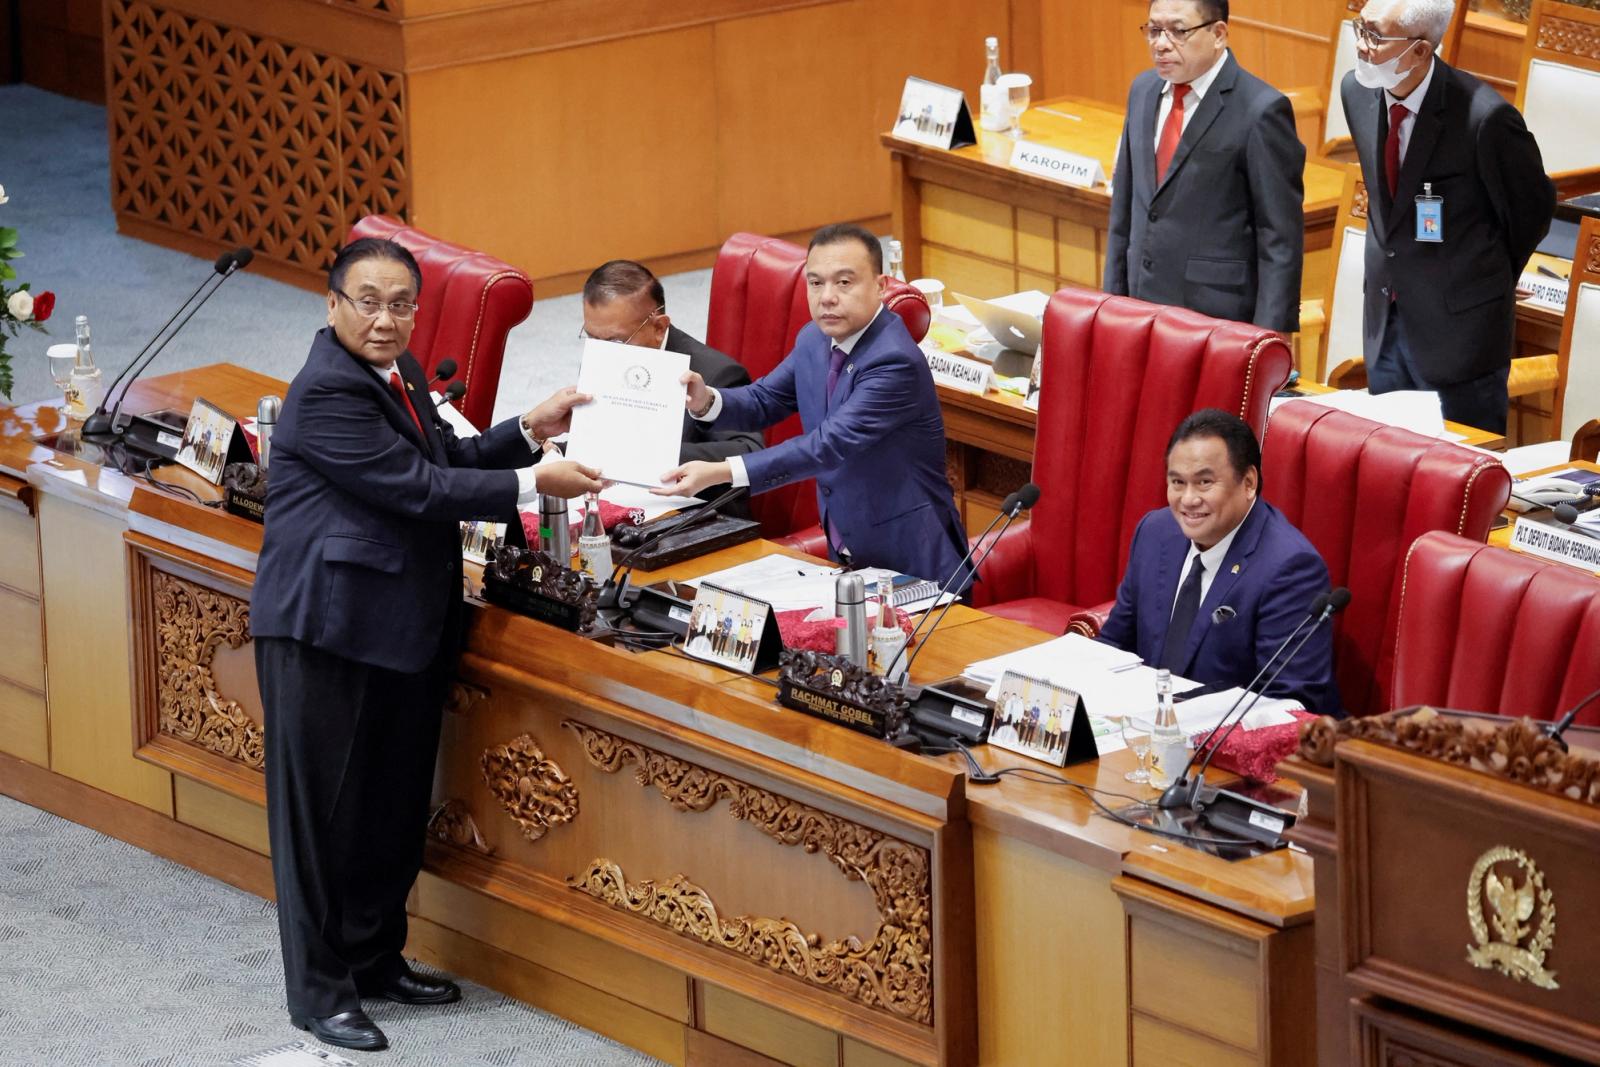 Bambang Wuryanto, head of the parliamentary commission overseeing the revision, passes the report of the new criminal code to Sufmi Dasco Ahmad, Deputy speaker of the House of Representatives, during a parliamentary plenary meeting in Jakarta, Indonesia